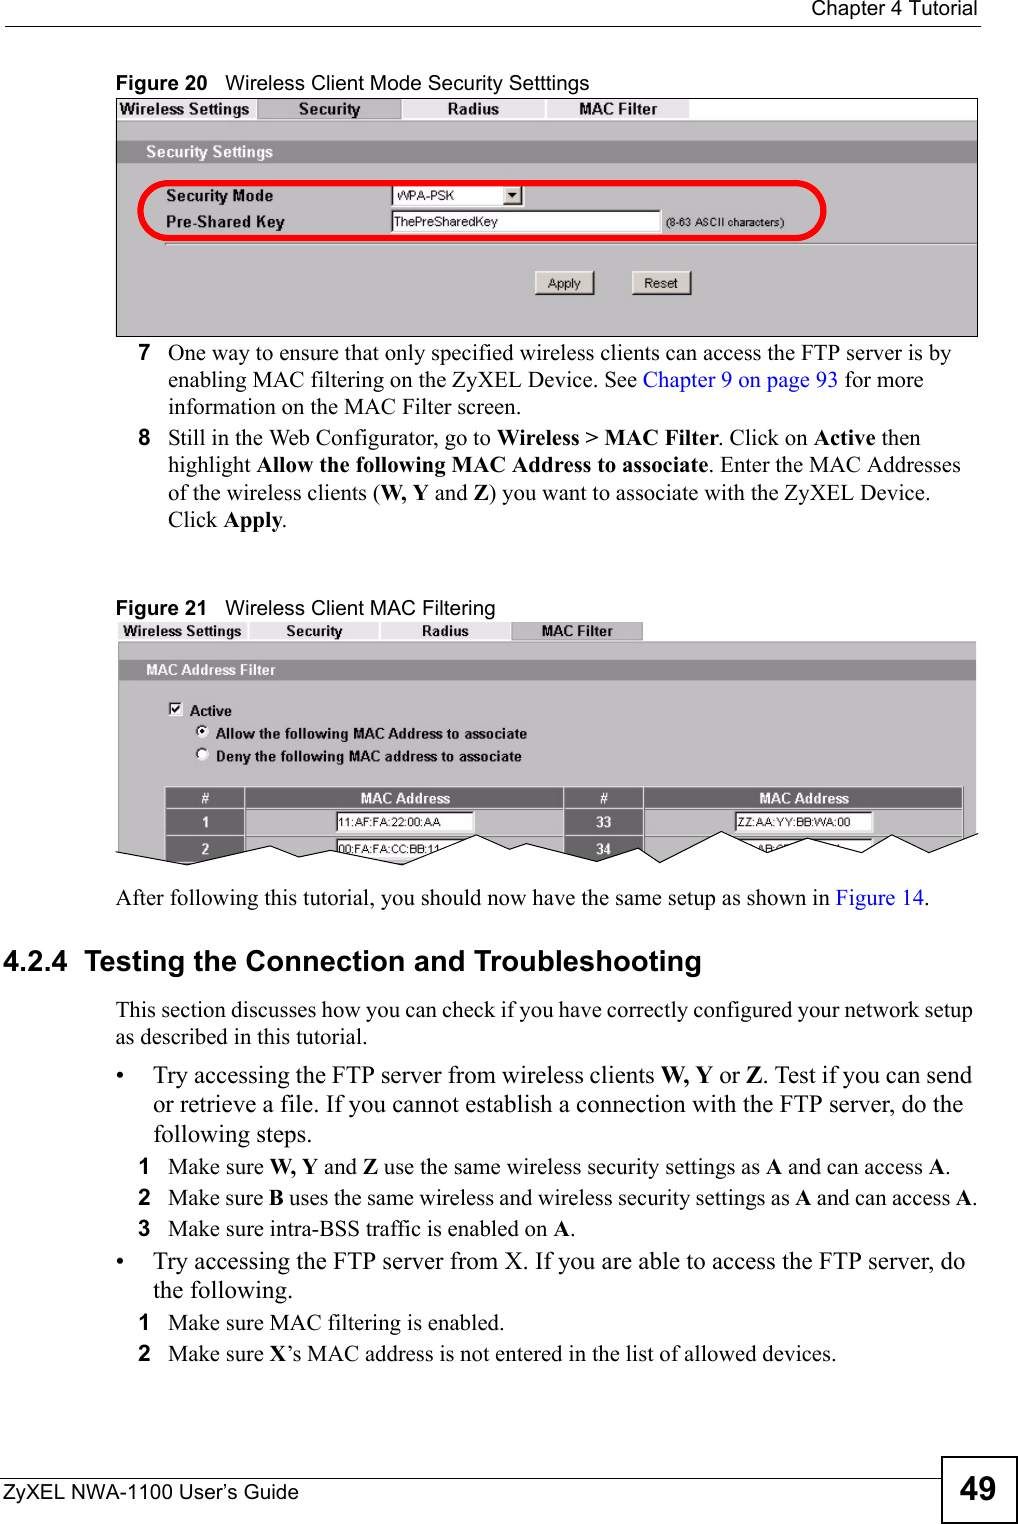  Chapter 4 TutorialZyXEL NWA-1100 User’s Guide 49Figure 20   Wireless Client Mode Security Setttings7One way to ensure that only specified wireless clients can access the FTP server is by enabling MAC filtering on the ZyXEL Device. See Chapter 9 on page 93 for more information on the MAC Filter screen.8Still in the Web Configurator, go to Wireless &gt; MAC Filter. Click on Active then highlight Allow the following MAC Address to associate. Enter the MAC Addresses of the wireless clients (W, Y and Z) you want to associate with the ZyXEL Device. Click Apply. Figure 21   Wireless Client MAC FilteringAfter following this tutorial, you should now have the same setup as shown in Figure 14. 4.2.4  Testing the Connection and TroubleshootingThis section discusses how you can check if you have correctly configured your network setup as described in this tutorial.• Try accessing the FTP server from wireless clients W, Y or Z. Test if you can send or retrieve a file. If you cannot establish a connection with the FTP server, do the following steps.1Make sure W, Y and Z use the same wireless security settings as A and can access A.2Make sure B uses the same wireless and wireless security settings as A and can access A.3Make sure intra-BSS traffic is enabled on A. • Try accessing the FTP server from X. If you are able to access the FTP server, do the following.1Make sure MAC filtering is enabled.2Make sure X’s MAC address is not entered in the list of allowed devices. 